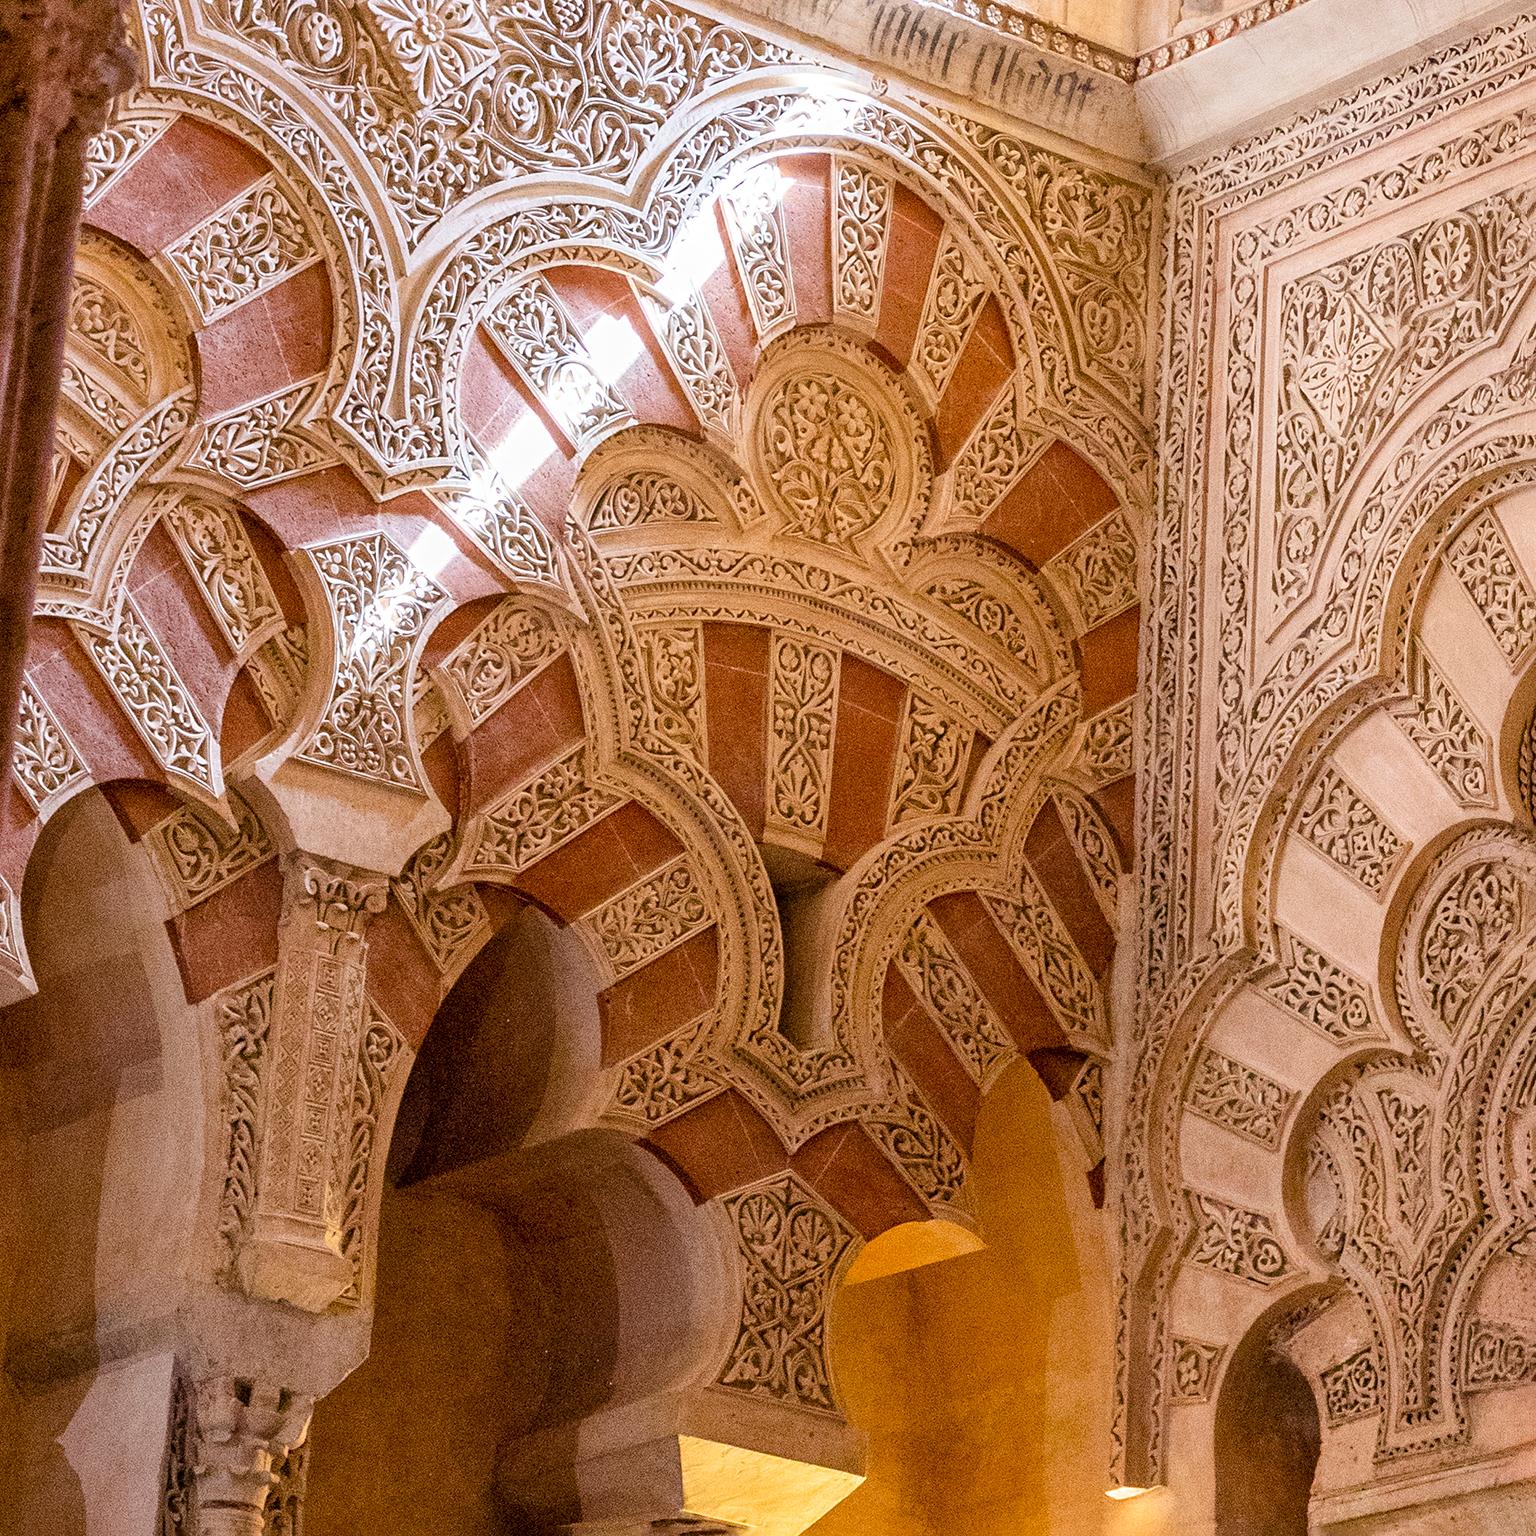 Photograph by Cosmo Condina of The Great Mosque of Cordoba, Andalusia, Spain. Created, 2023.
Archival Pigment Print, 27” X 40”, Edition of 3 with 2 A/P. This is #1/3 in the edition.

This is an architectural detail of the interior of this Great